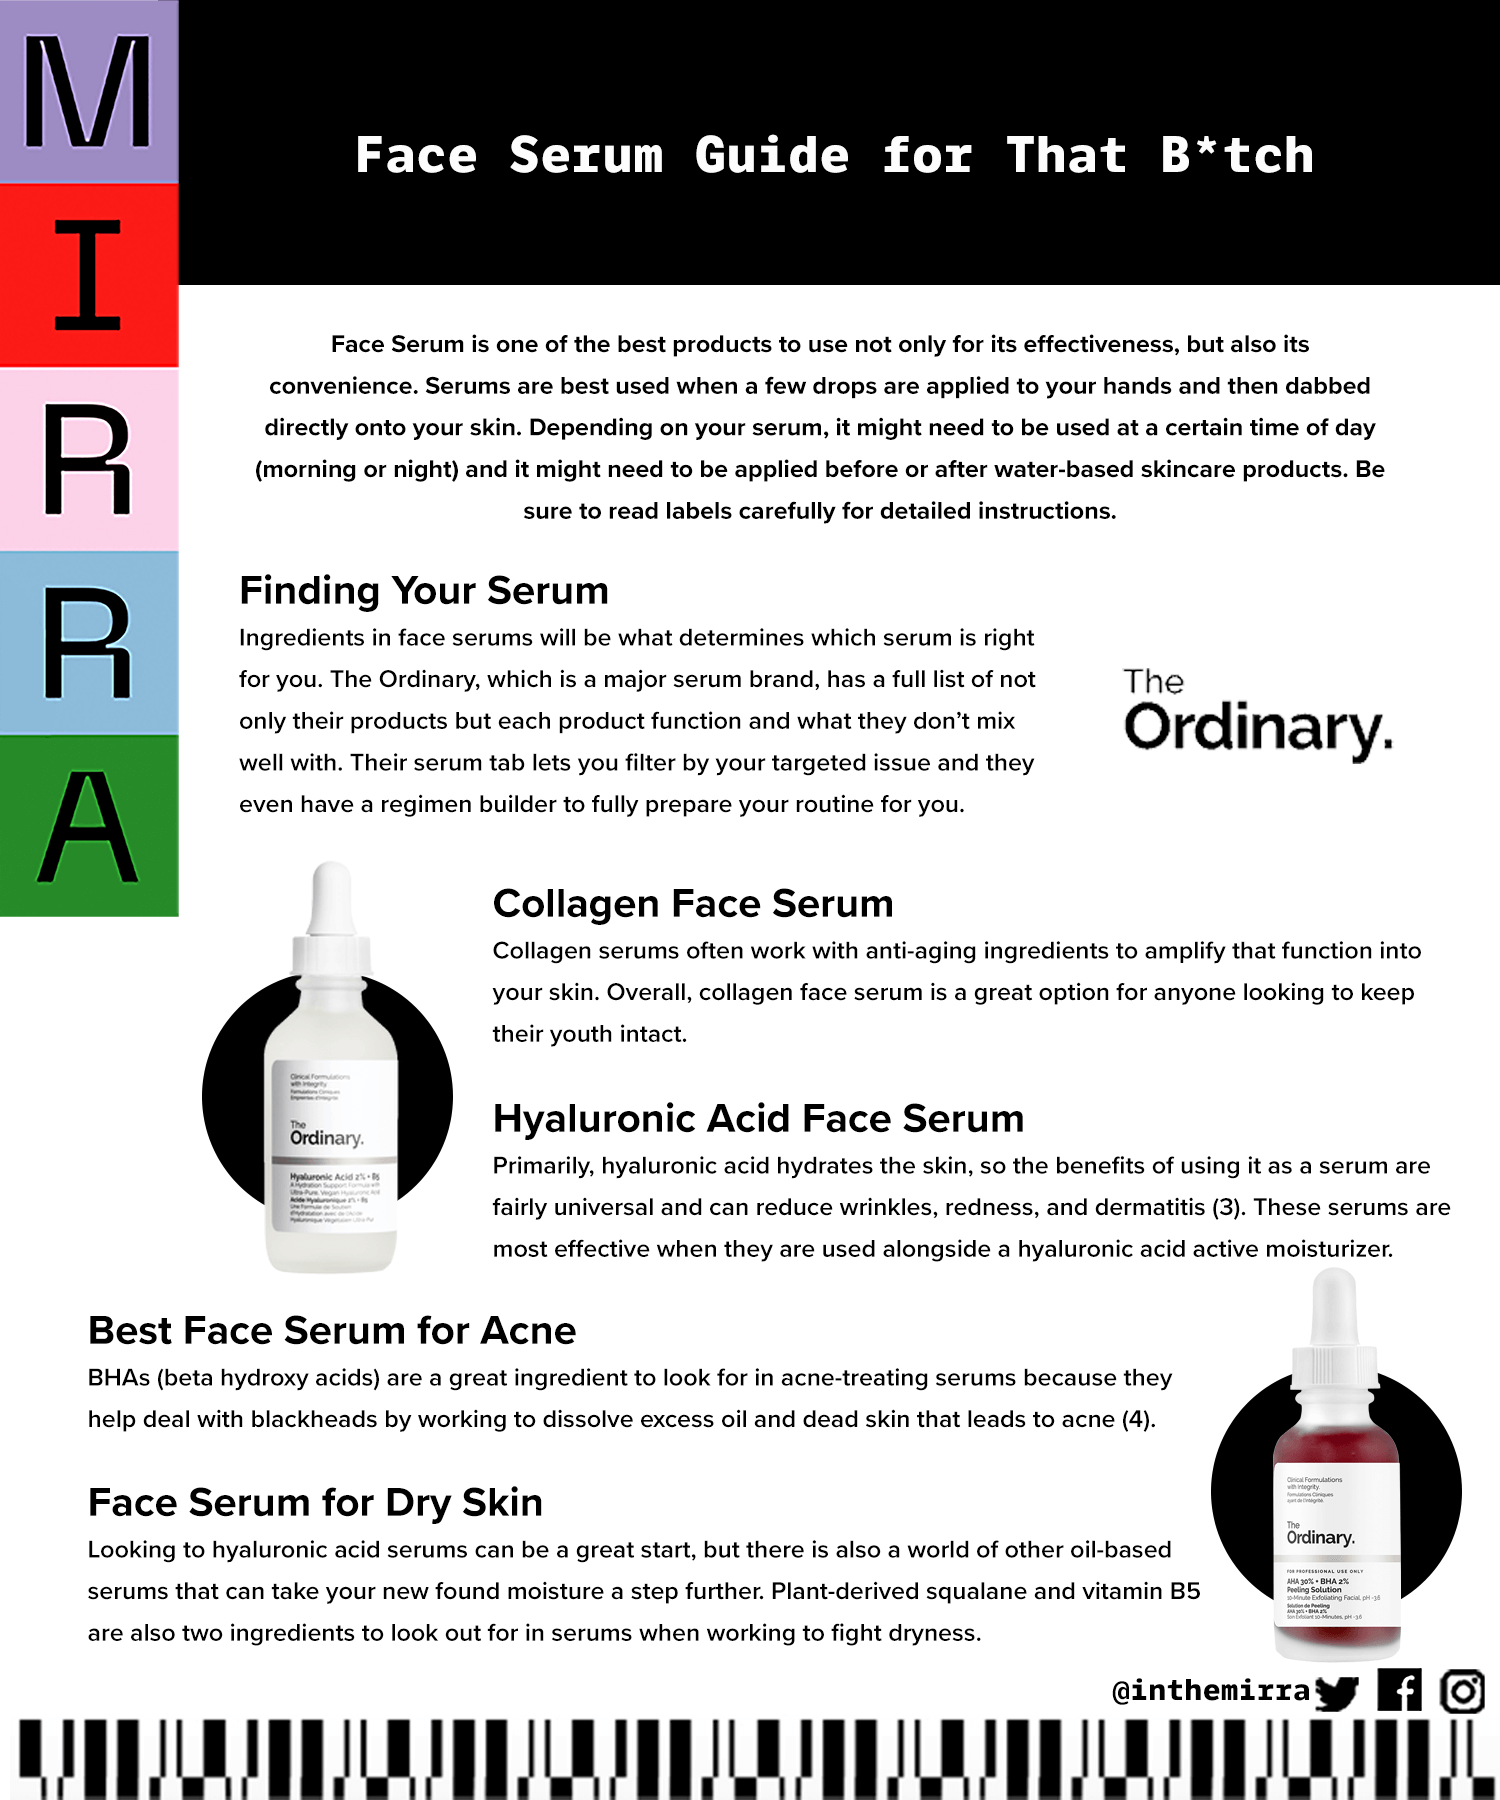 Face serum guide for that B*tch Mirra skincare